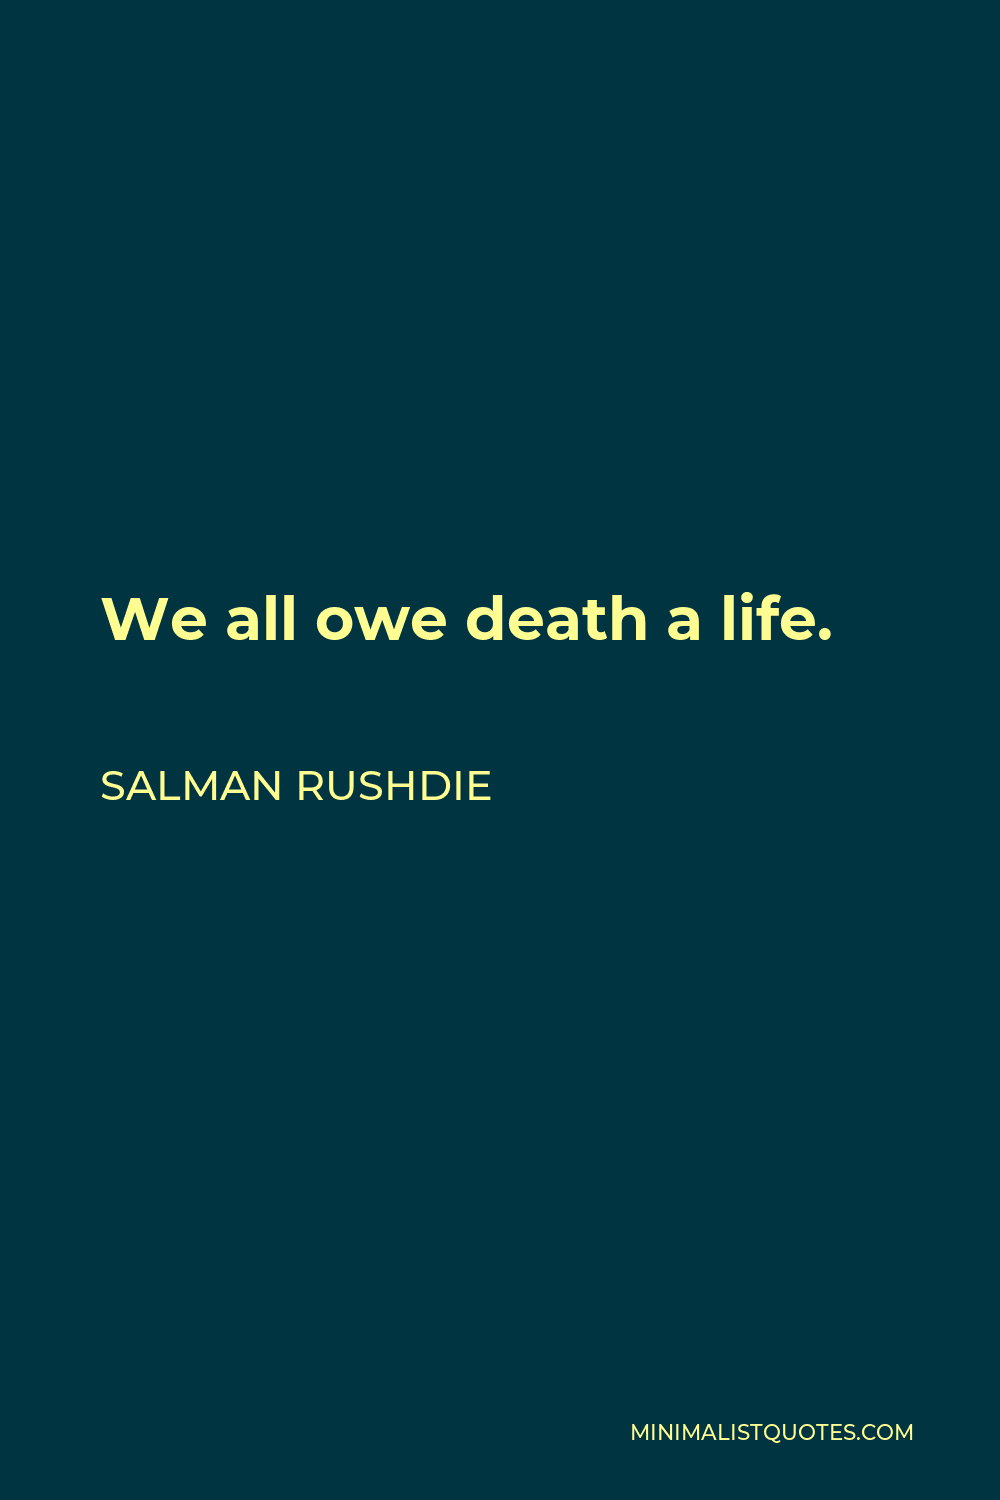 Salman Rushdie Quote - We all owe death a life.